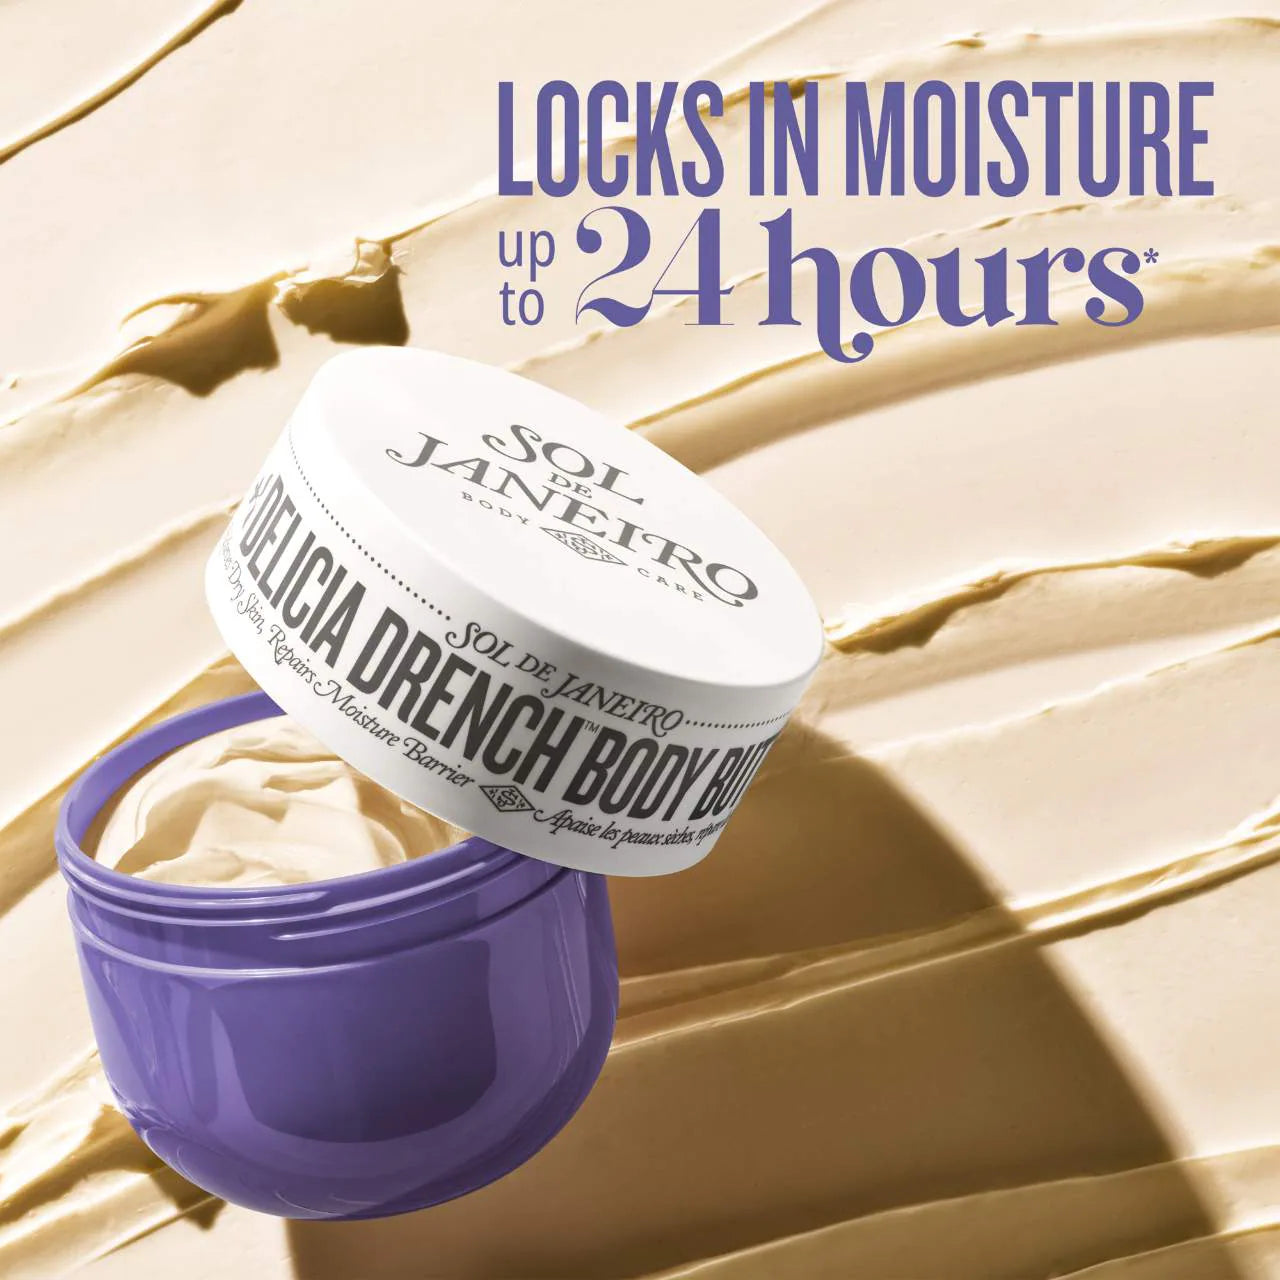 Mini Delícia Drench™ Body Butter for Intense Moisture and Skin Barrier Repair *Pre-Order*